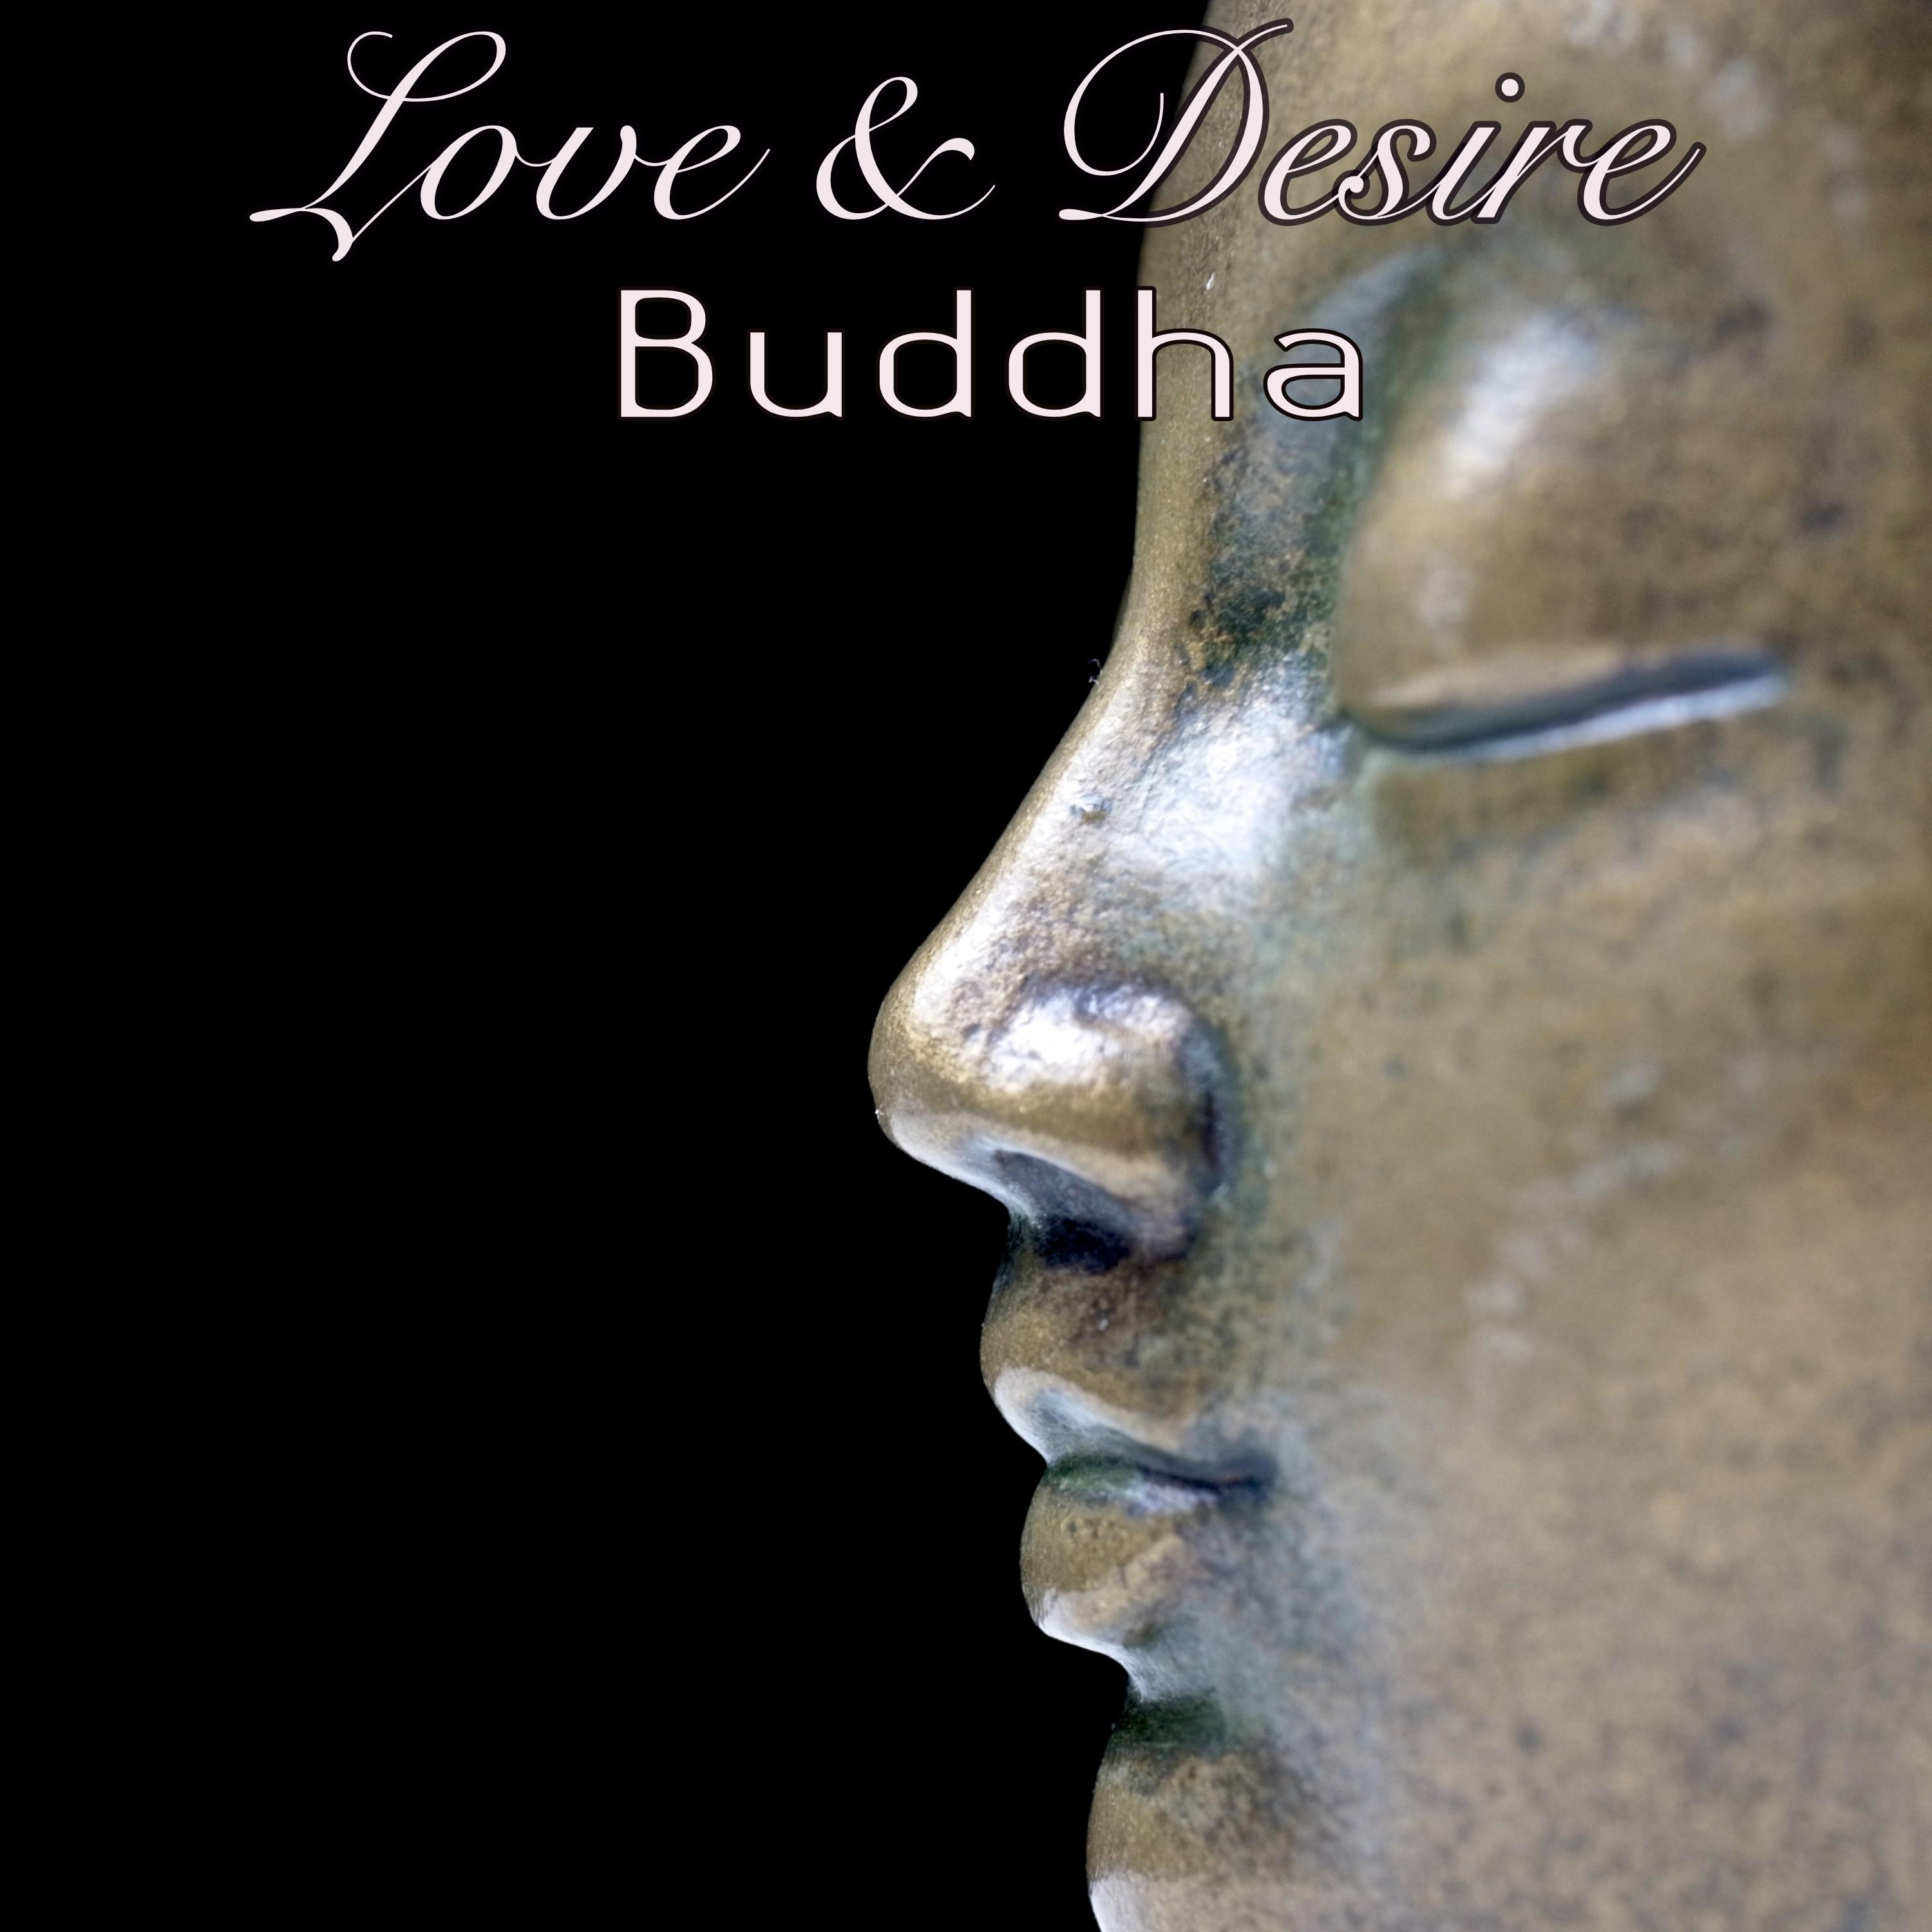 Buddha Love  Desire  Extremely Sensuous Lounge  Chill Music for Nightlife